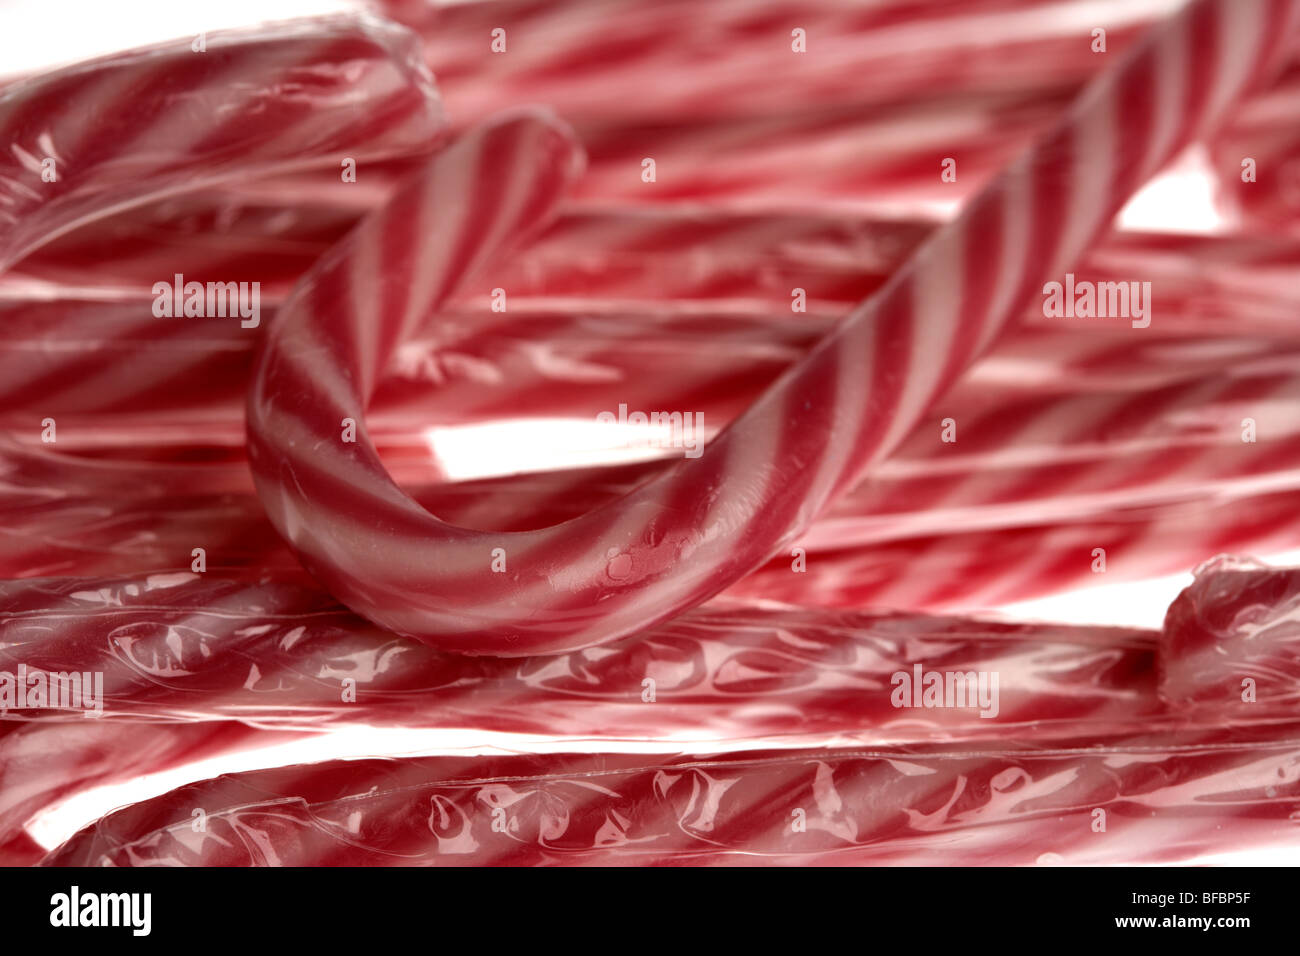 candy canes usually used at christmas as tree decorations Stock Photo